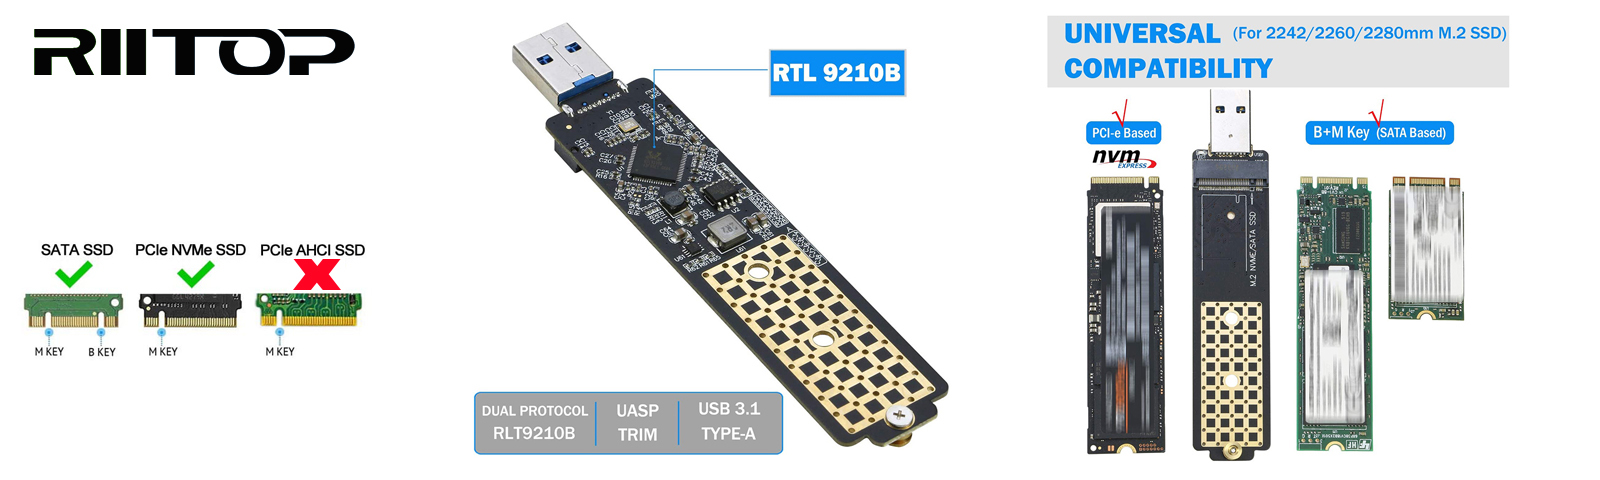 M.2 NGFF NVMe to USB Adapter Converter, RIITOP M2 SSD to USB 3.0